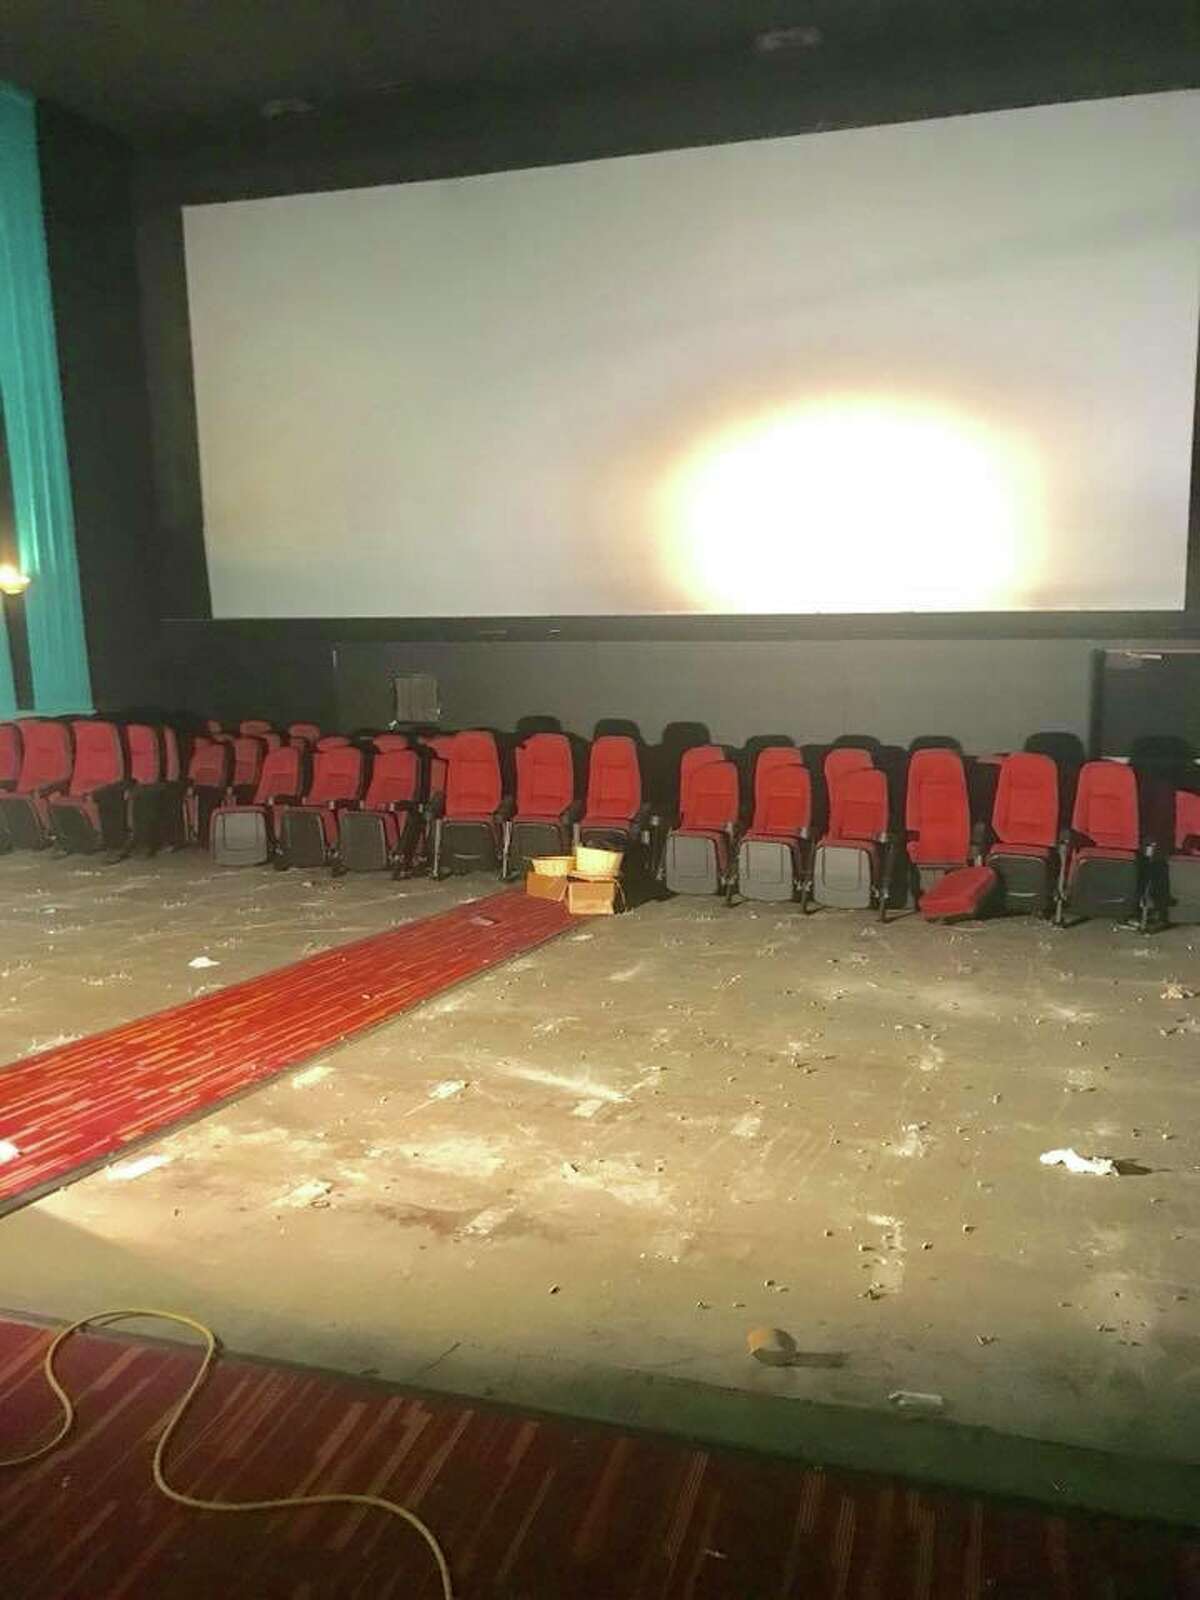 Renovations inside Albany's former Madison Theatre are in full swing, according to the construction company converting the space into a dinner theater. The J. Wase Construction Corp. shared images of the Cosmic Cinemas project online on June 8, 2018.